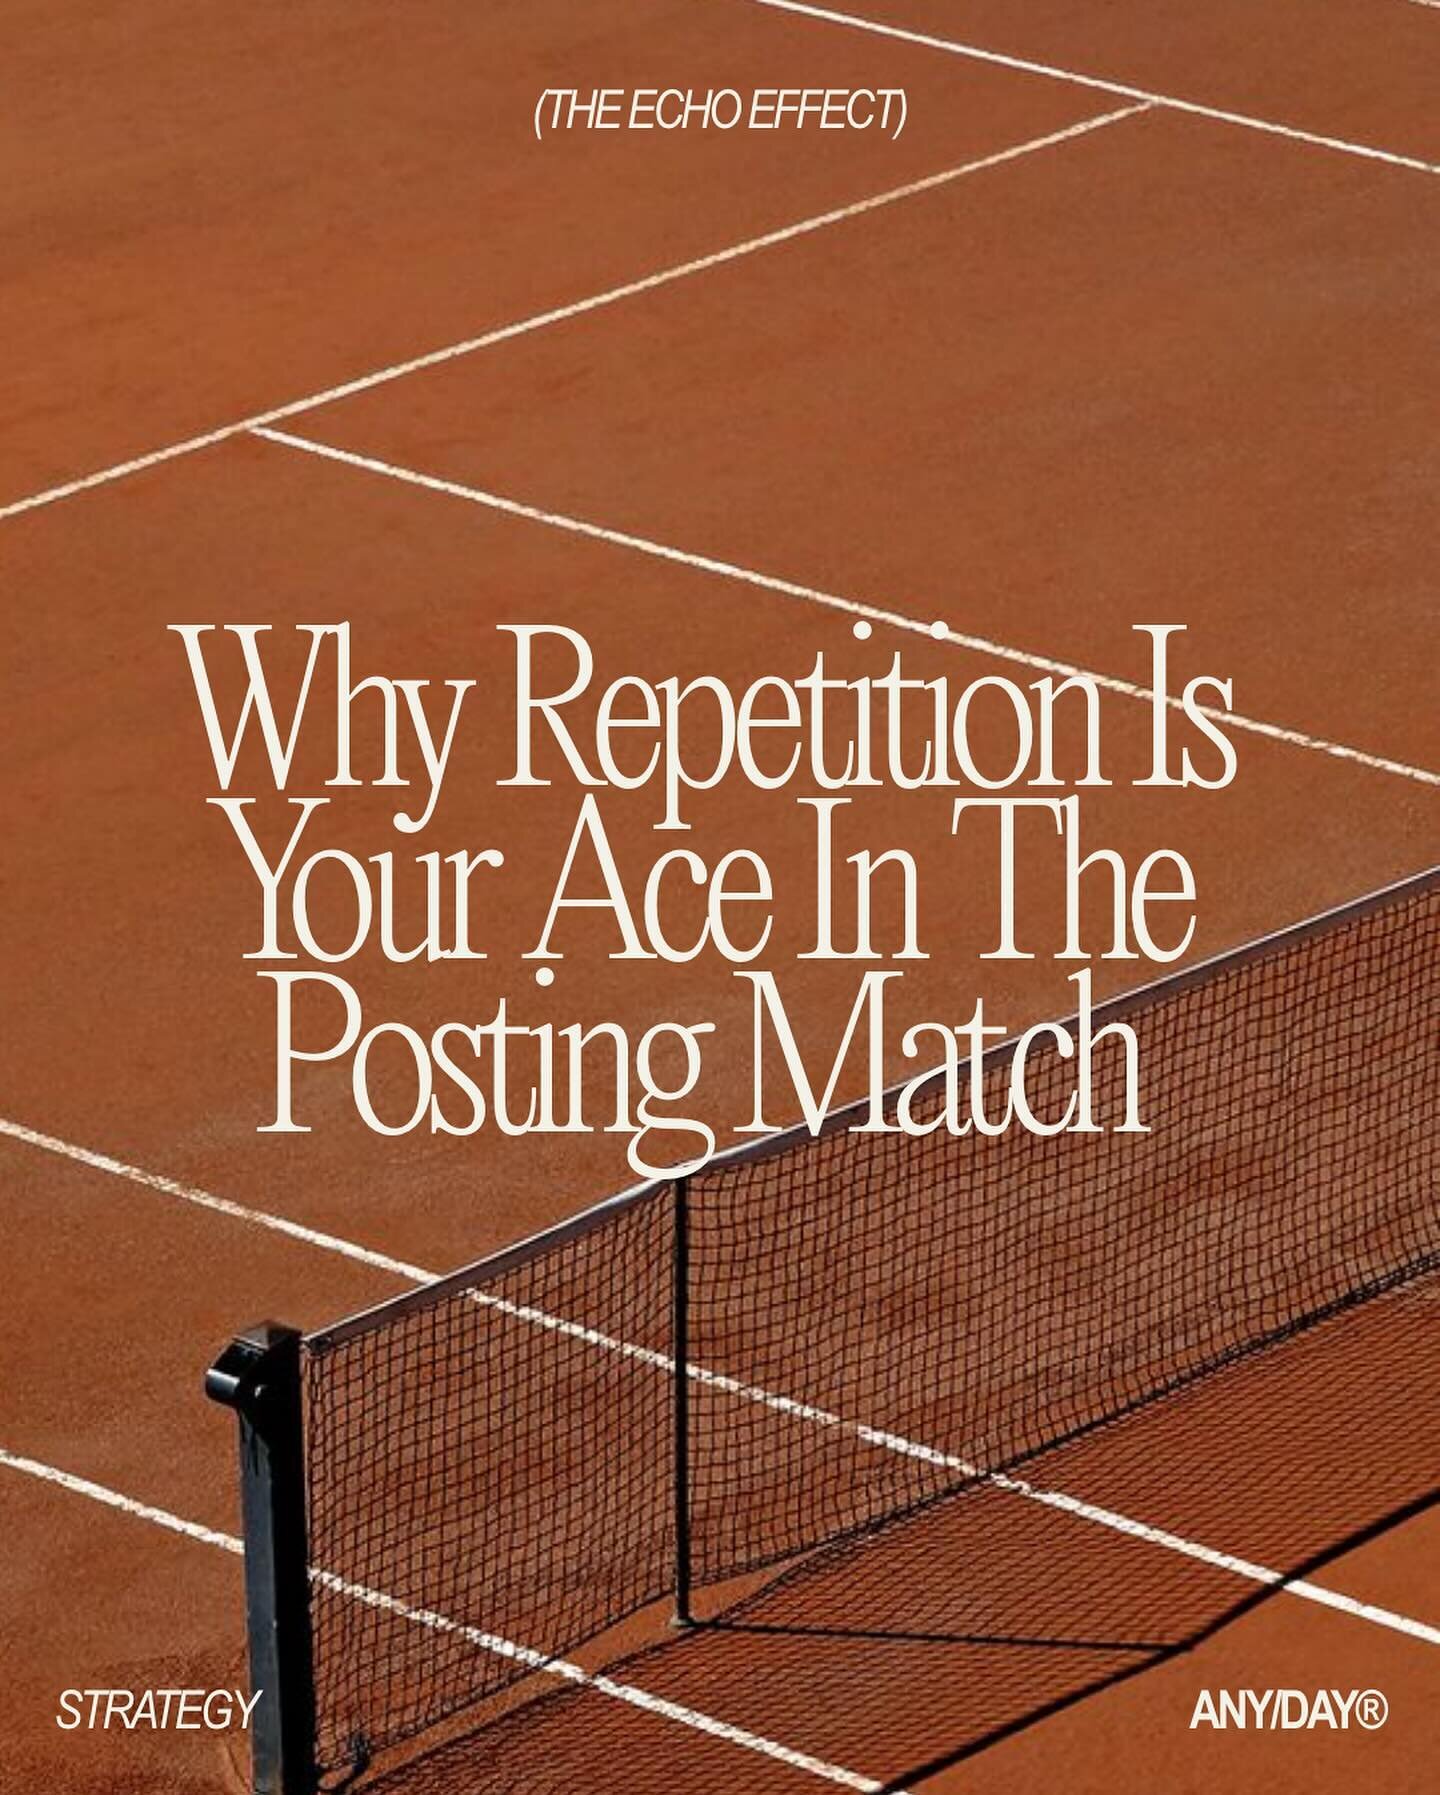 Serve up repetition - Why repetition is your ace in the posting match 👀

Ever wondered why some messages ace while others fault? Welcome to The Echo Effect &ndash; your secret serve in the digital court.

Reuse the winning shots that have resonated 